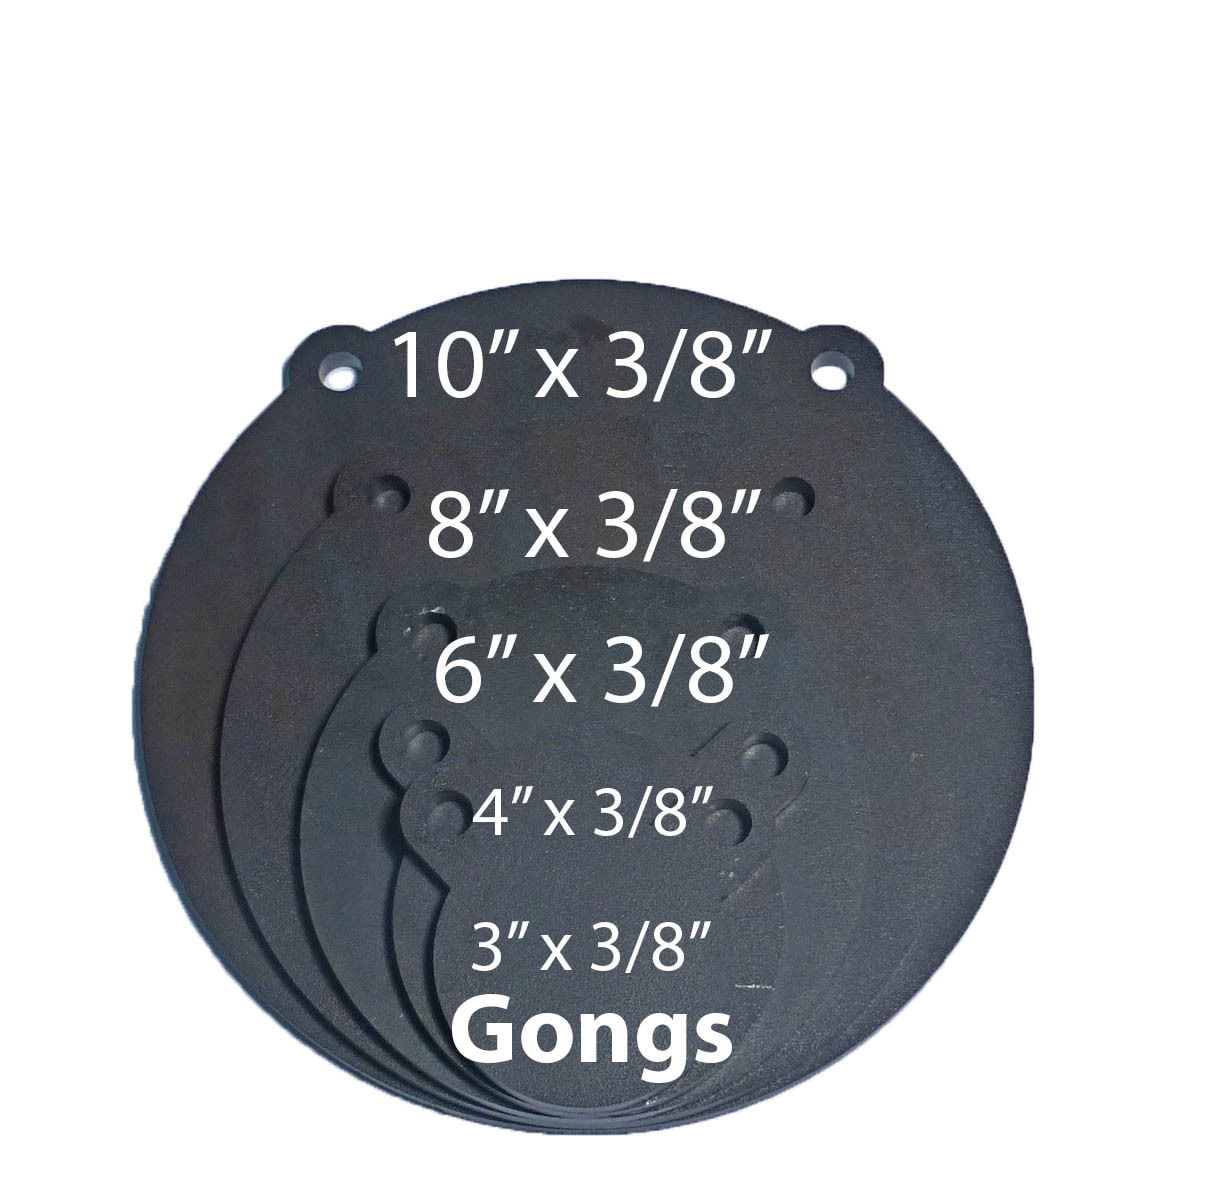 Set of 2 AR500 Steel 10" x 3/8" Shooting Targets Gong Style 